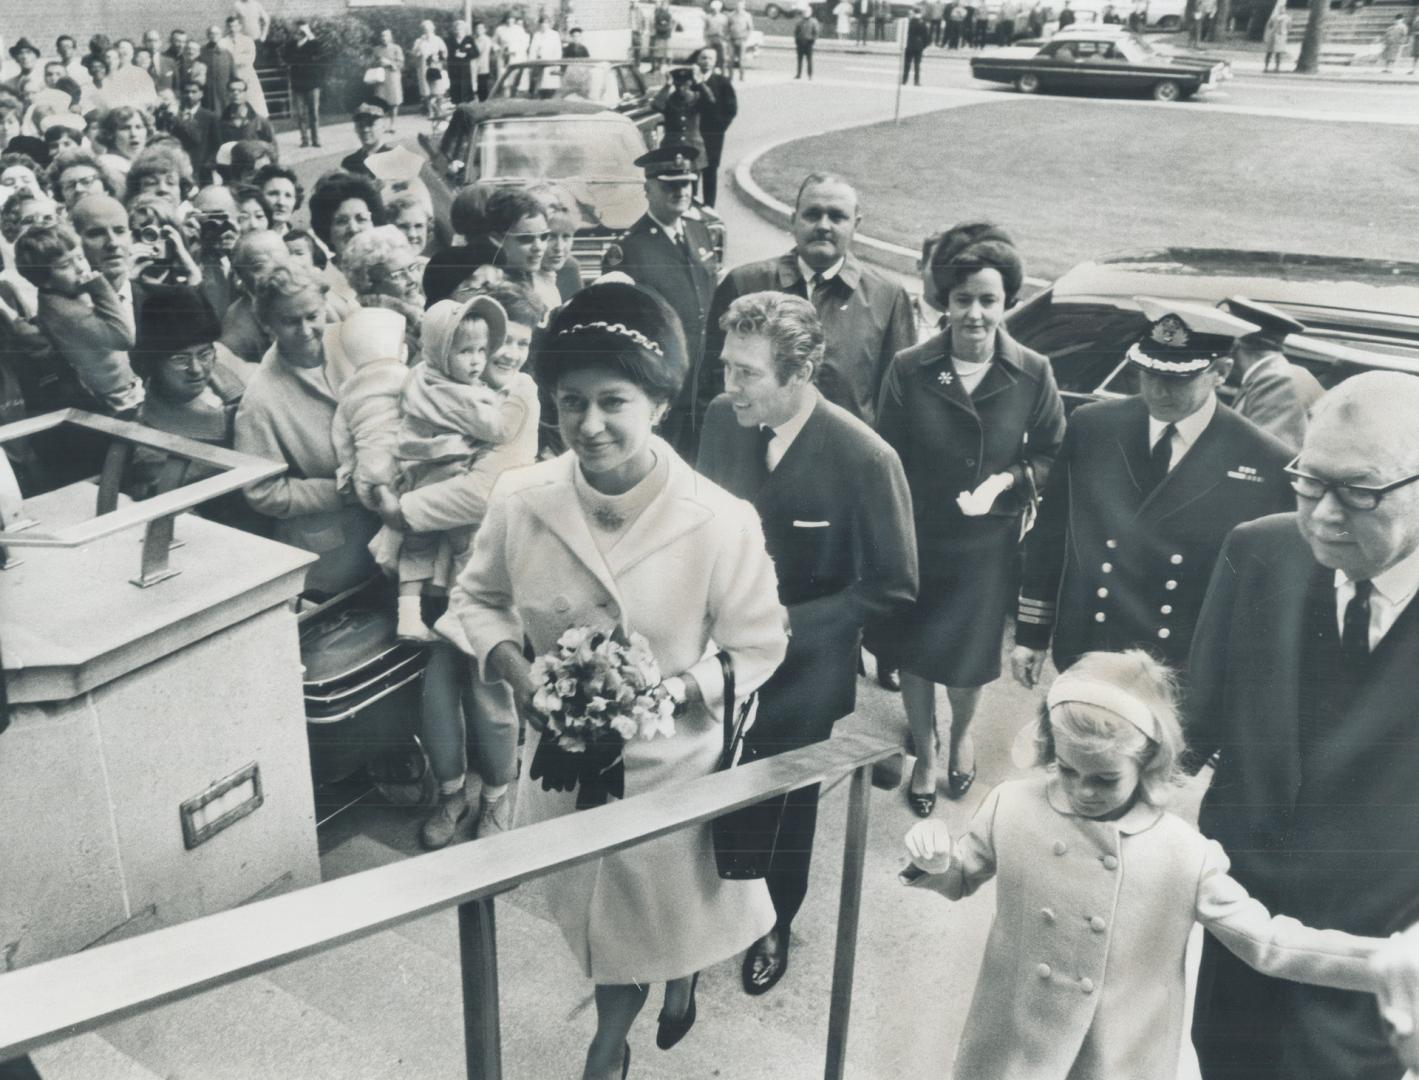 Touring hospital which bears her name, Princess Margaret and Lord Snowdon enter the Princess Margaret Hospital today